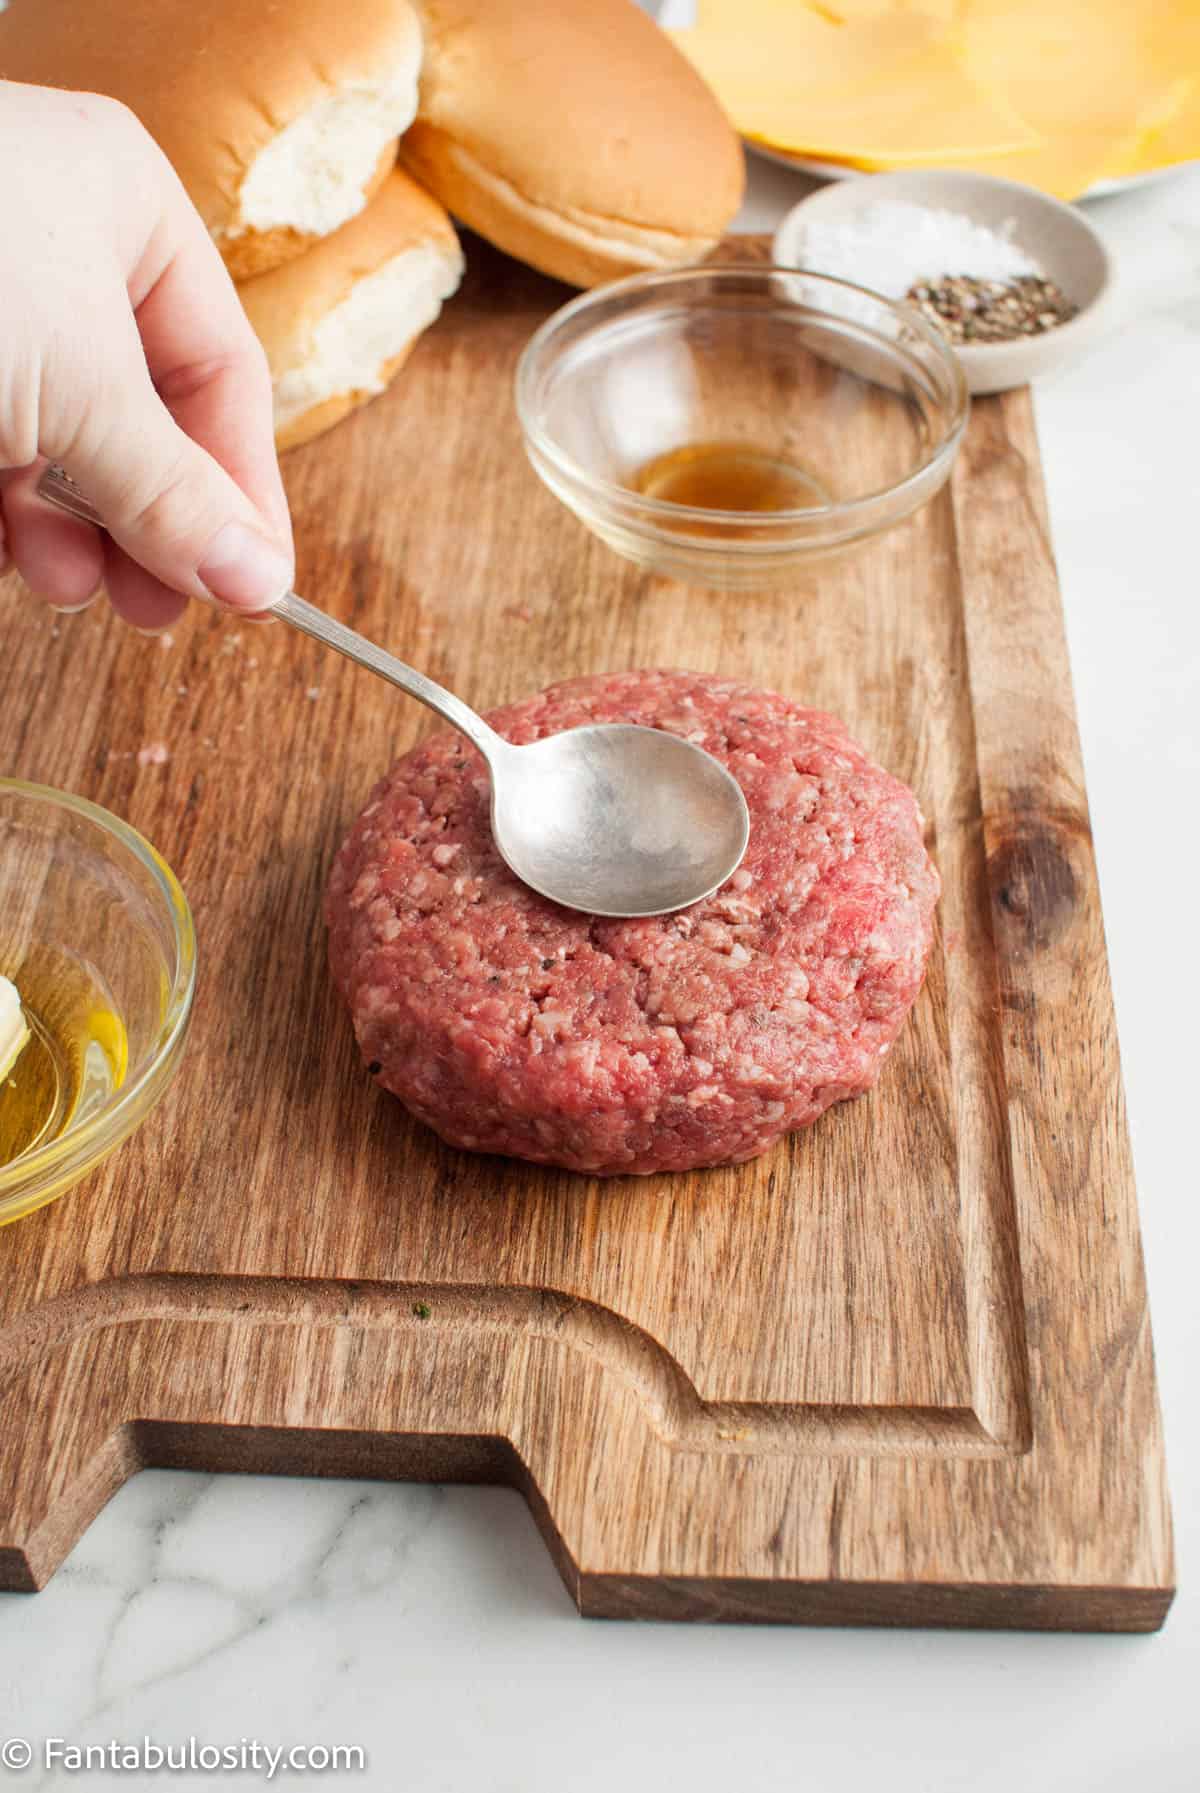 A spoon making a diet in the top of the burger patty.